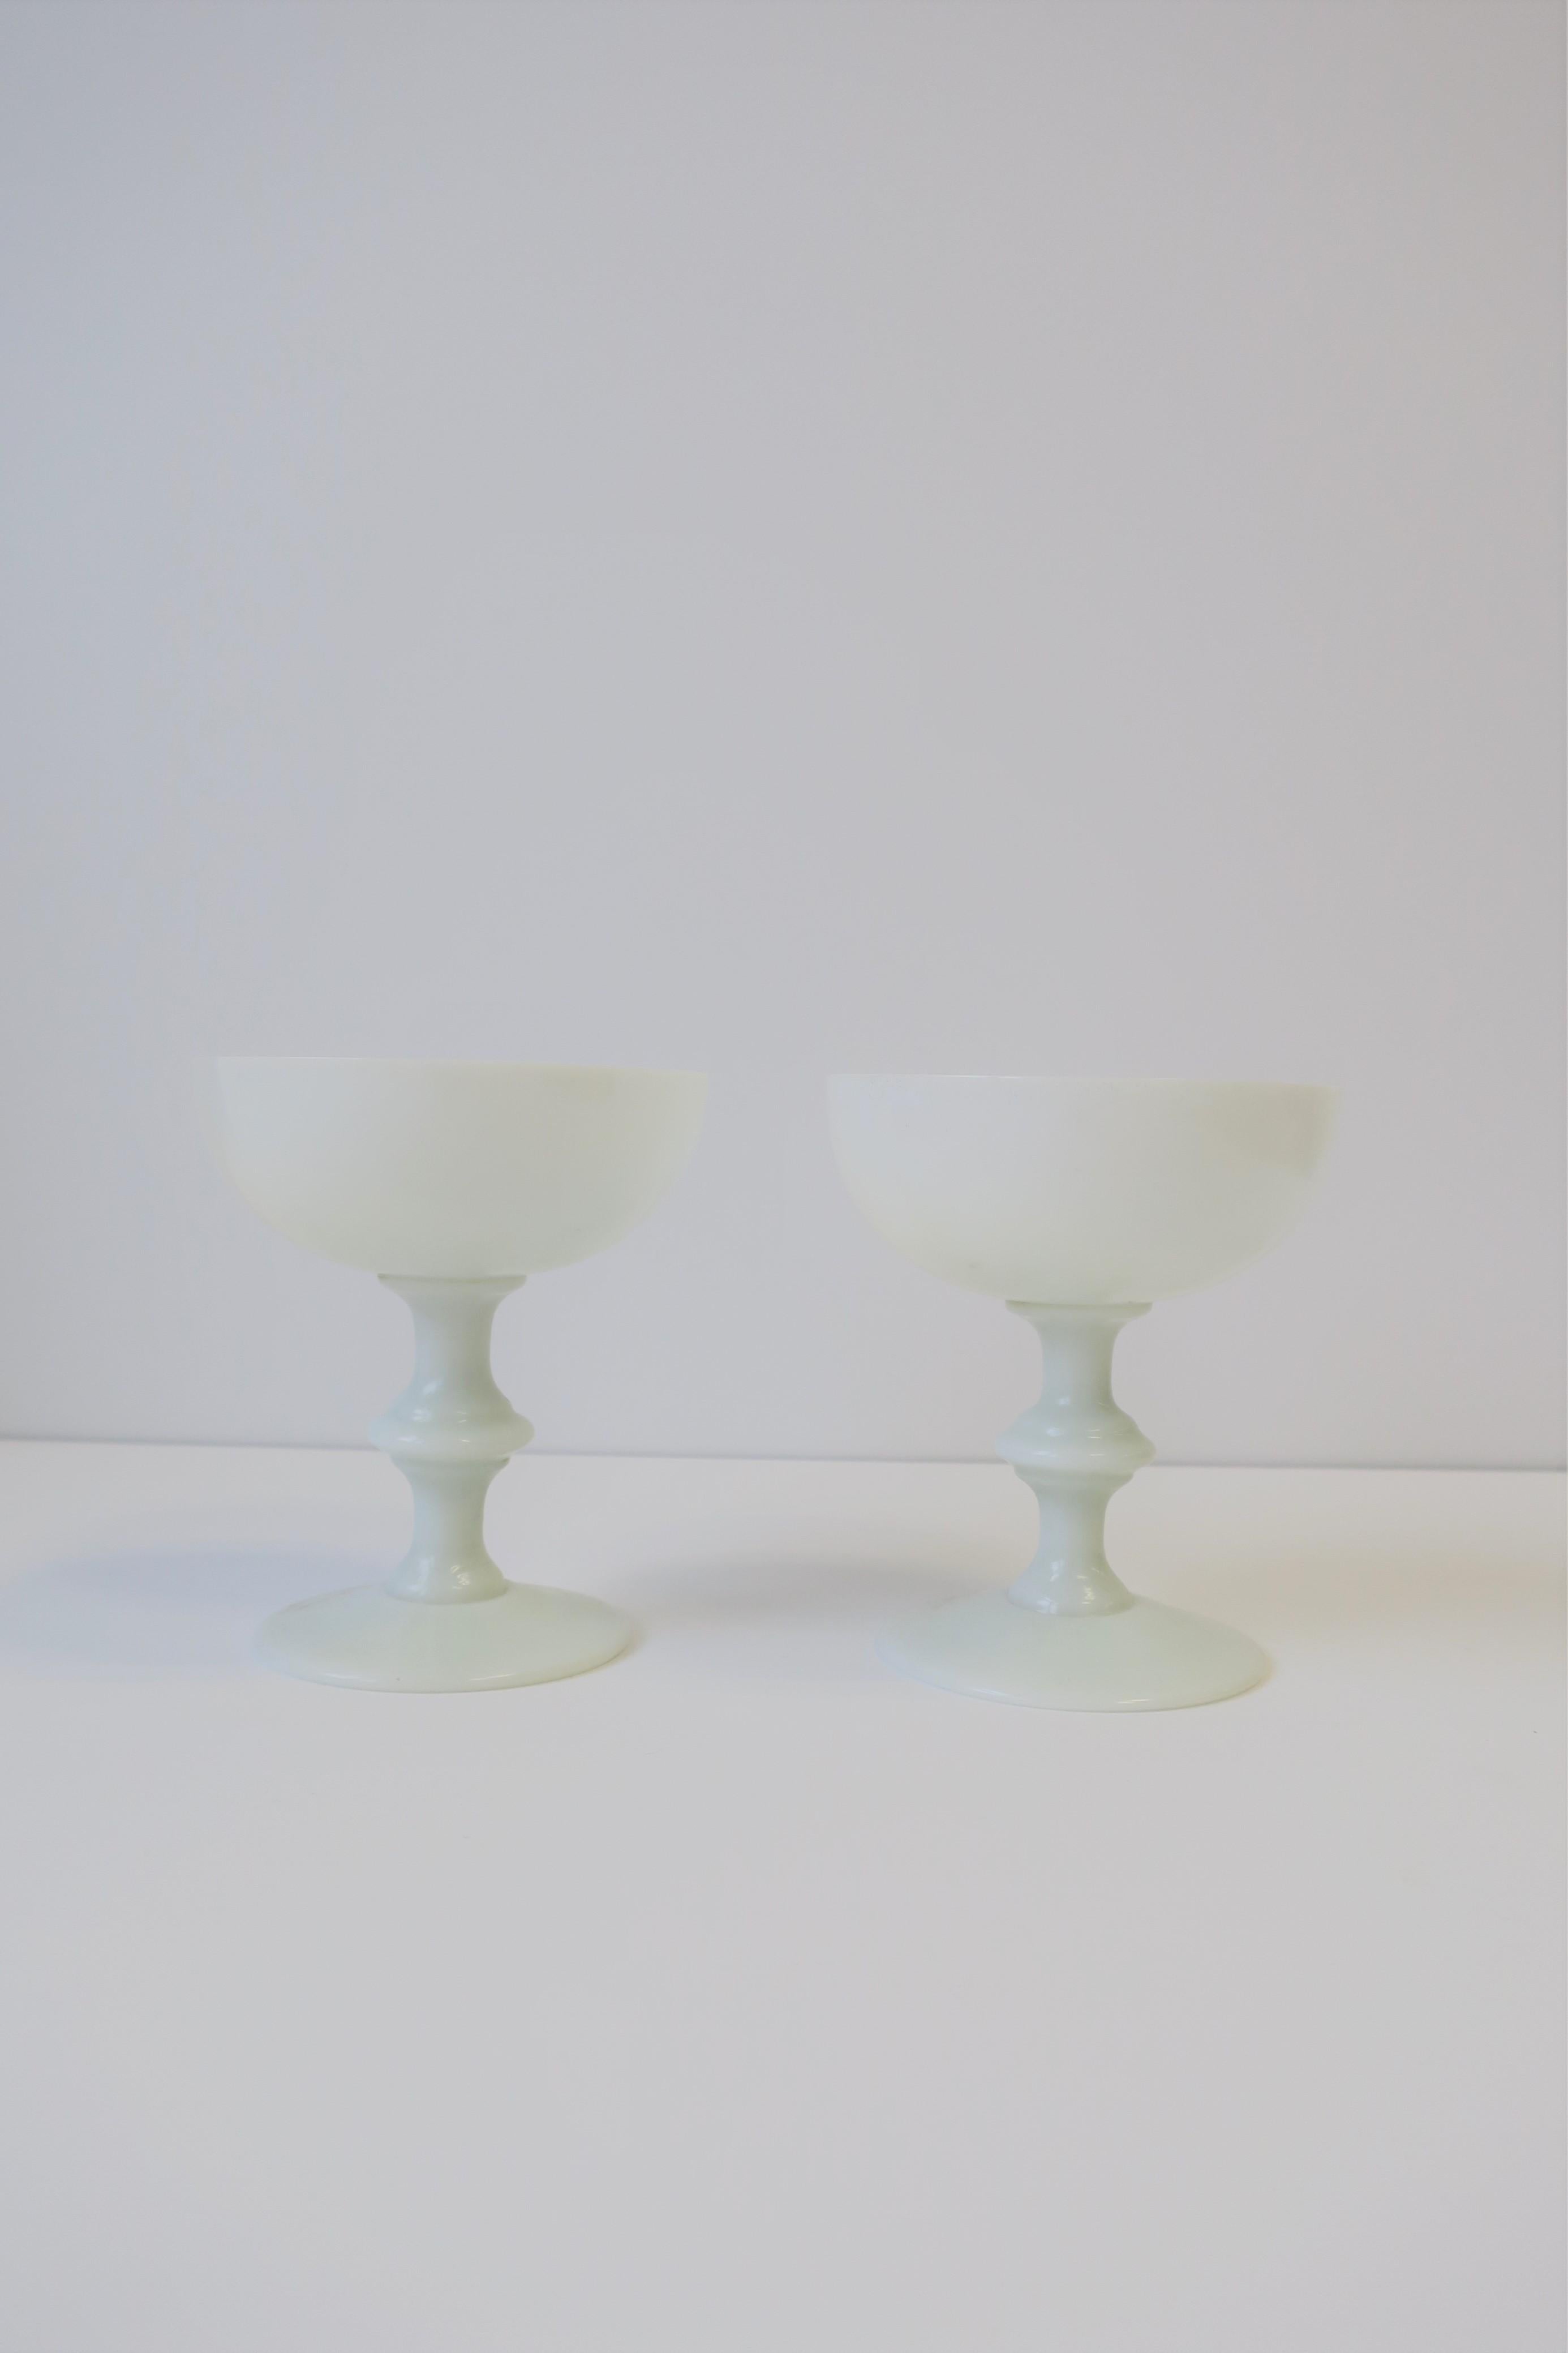 A beautiful pair of French white opaline Champagne glasses by Portieux Vallerysthal, circa early 20th century, France. 
Each glass measures: 4.75